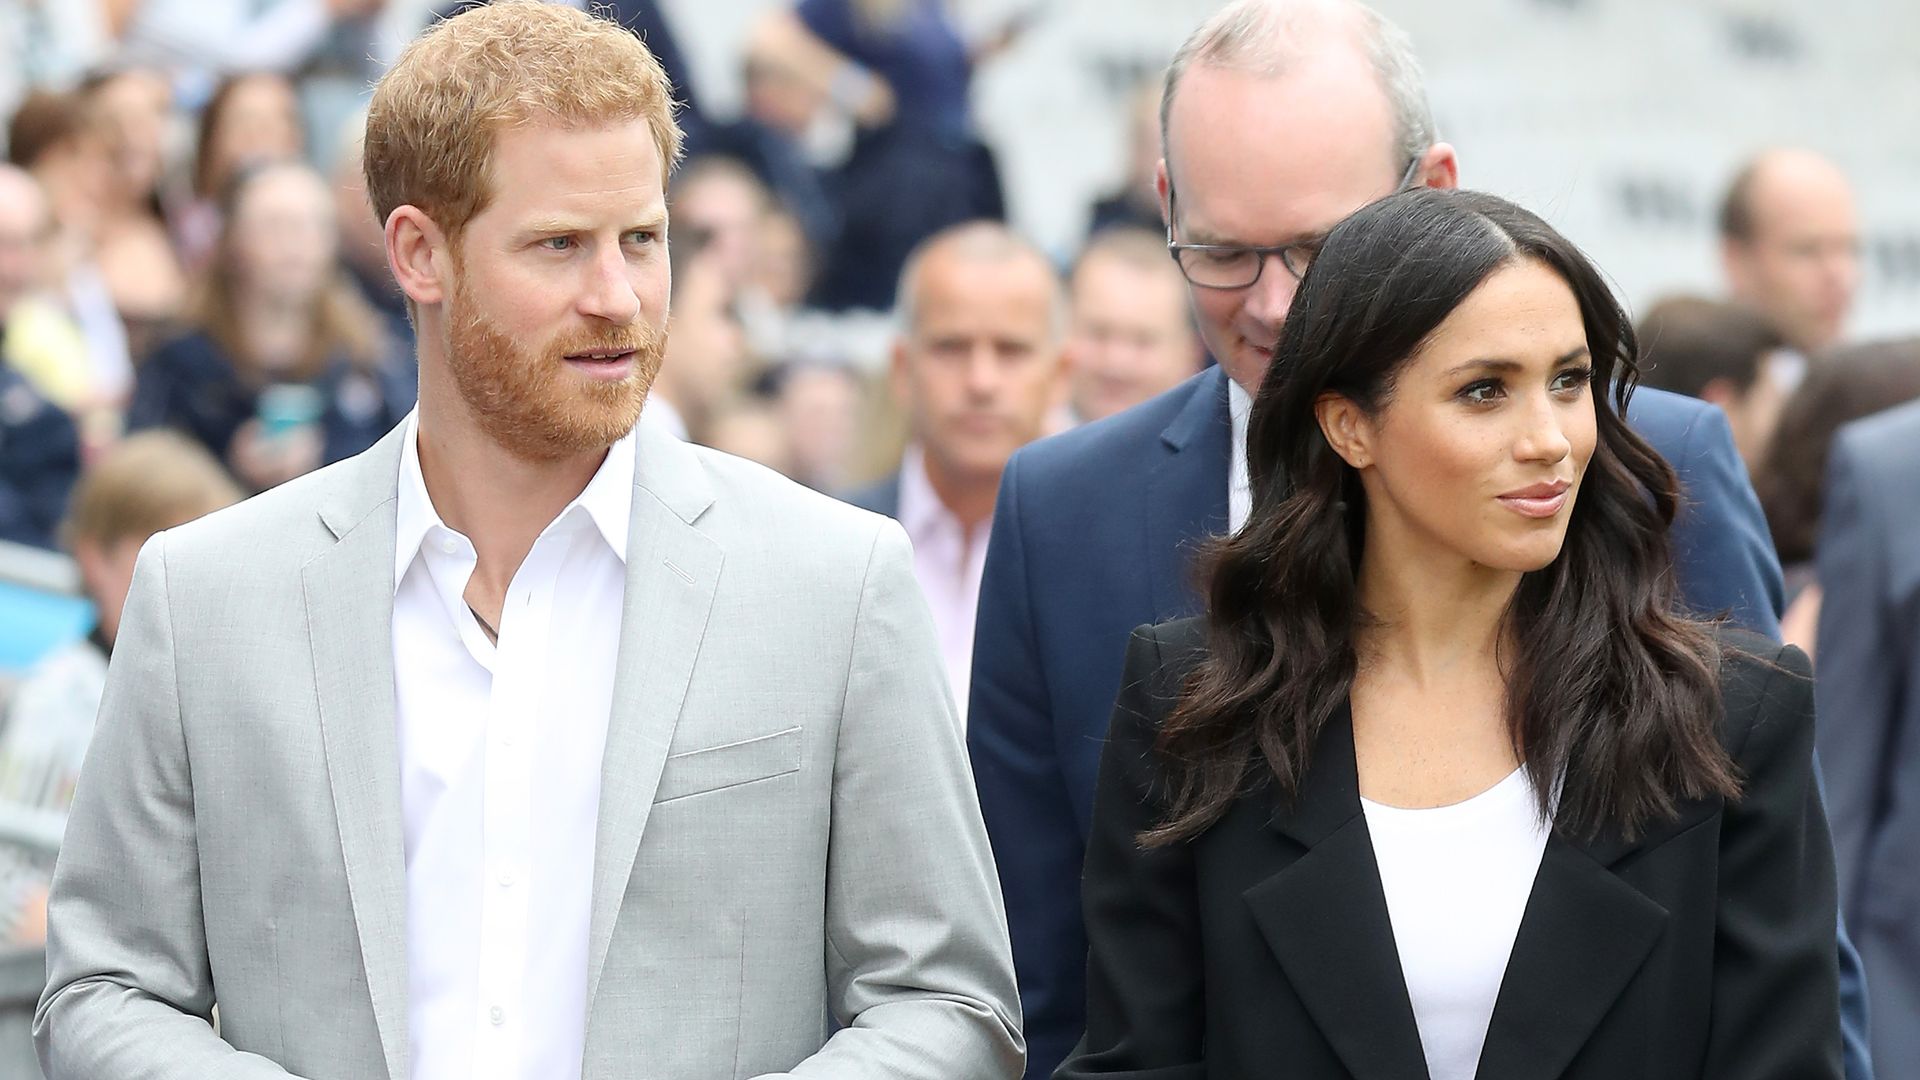 Prince Harry makes speedy exit following Invictus service to reunite with Meghan Markle in Nigeria